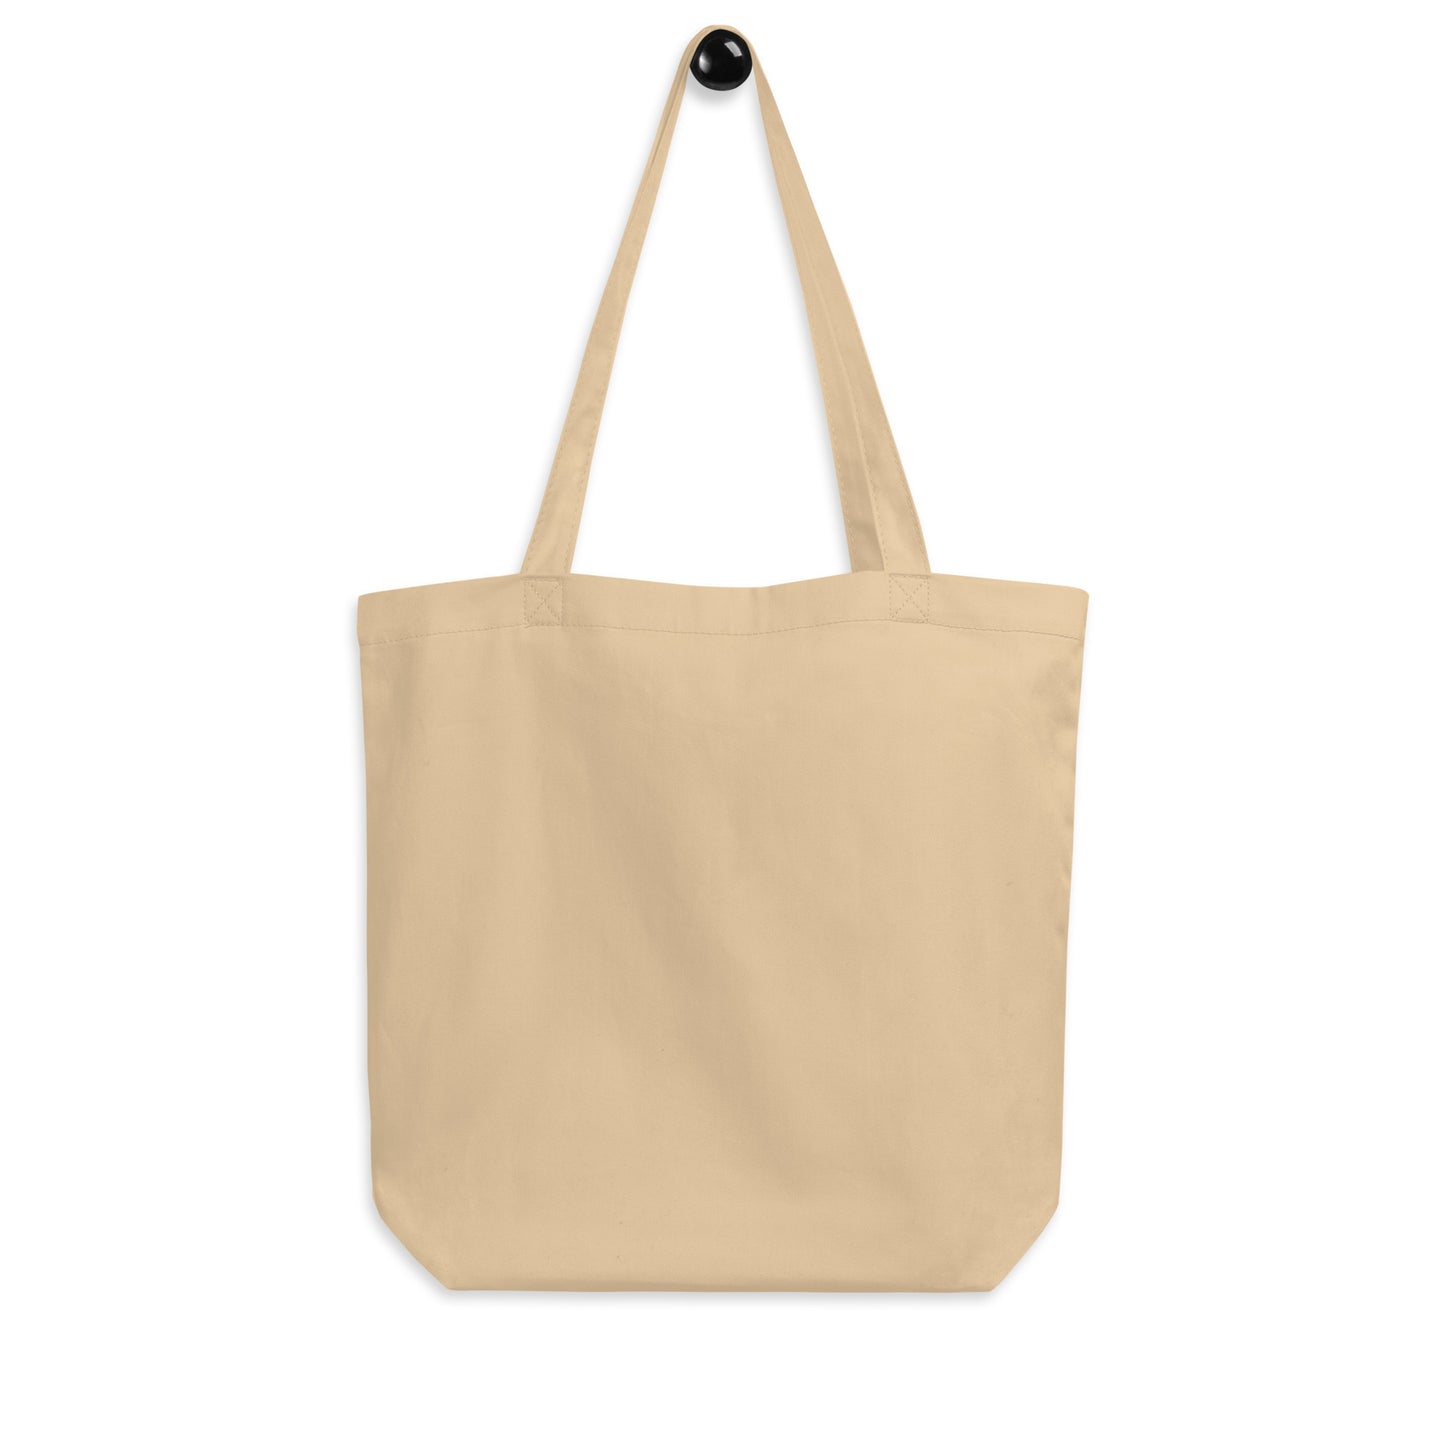 Aviation Gift Organic Tote - Black • FCO Rome • YHM Designs - Image 05